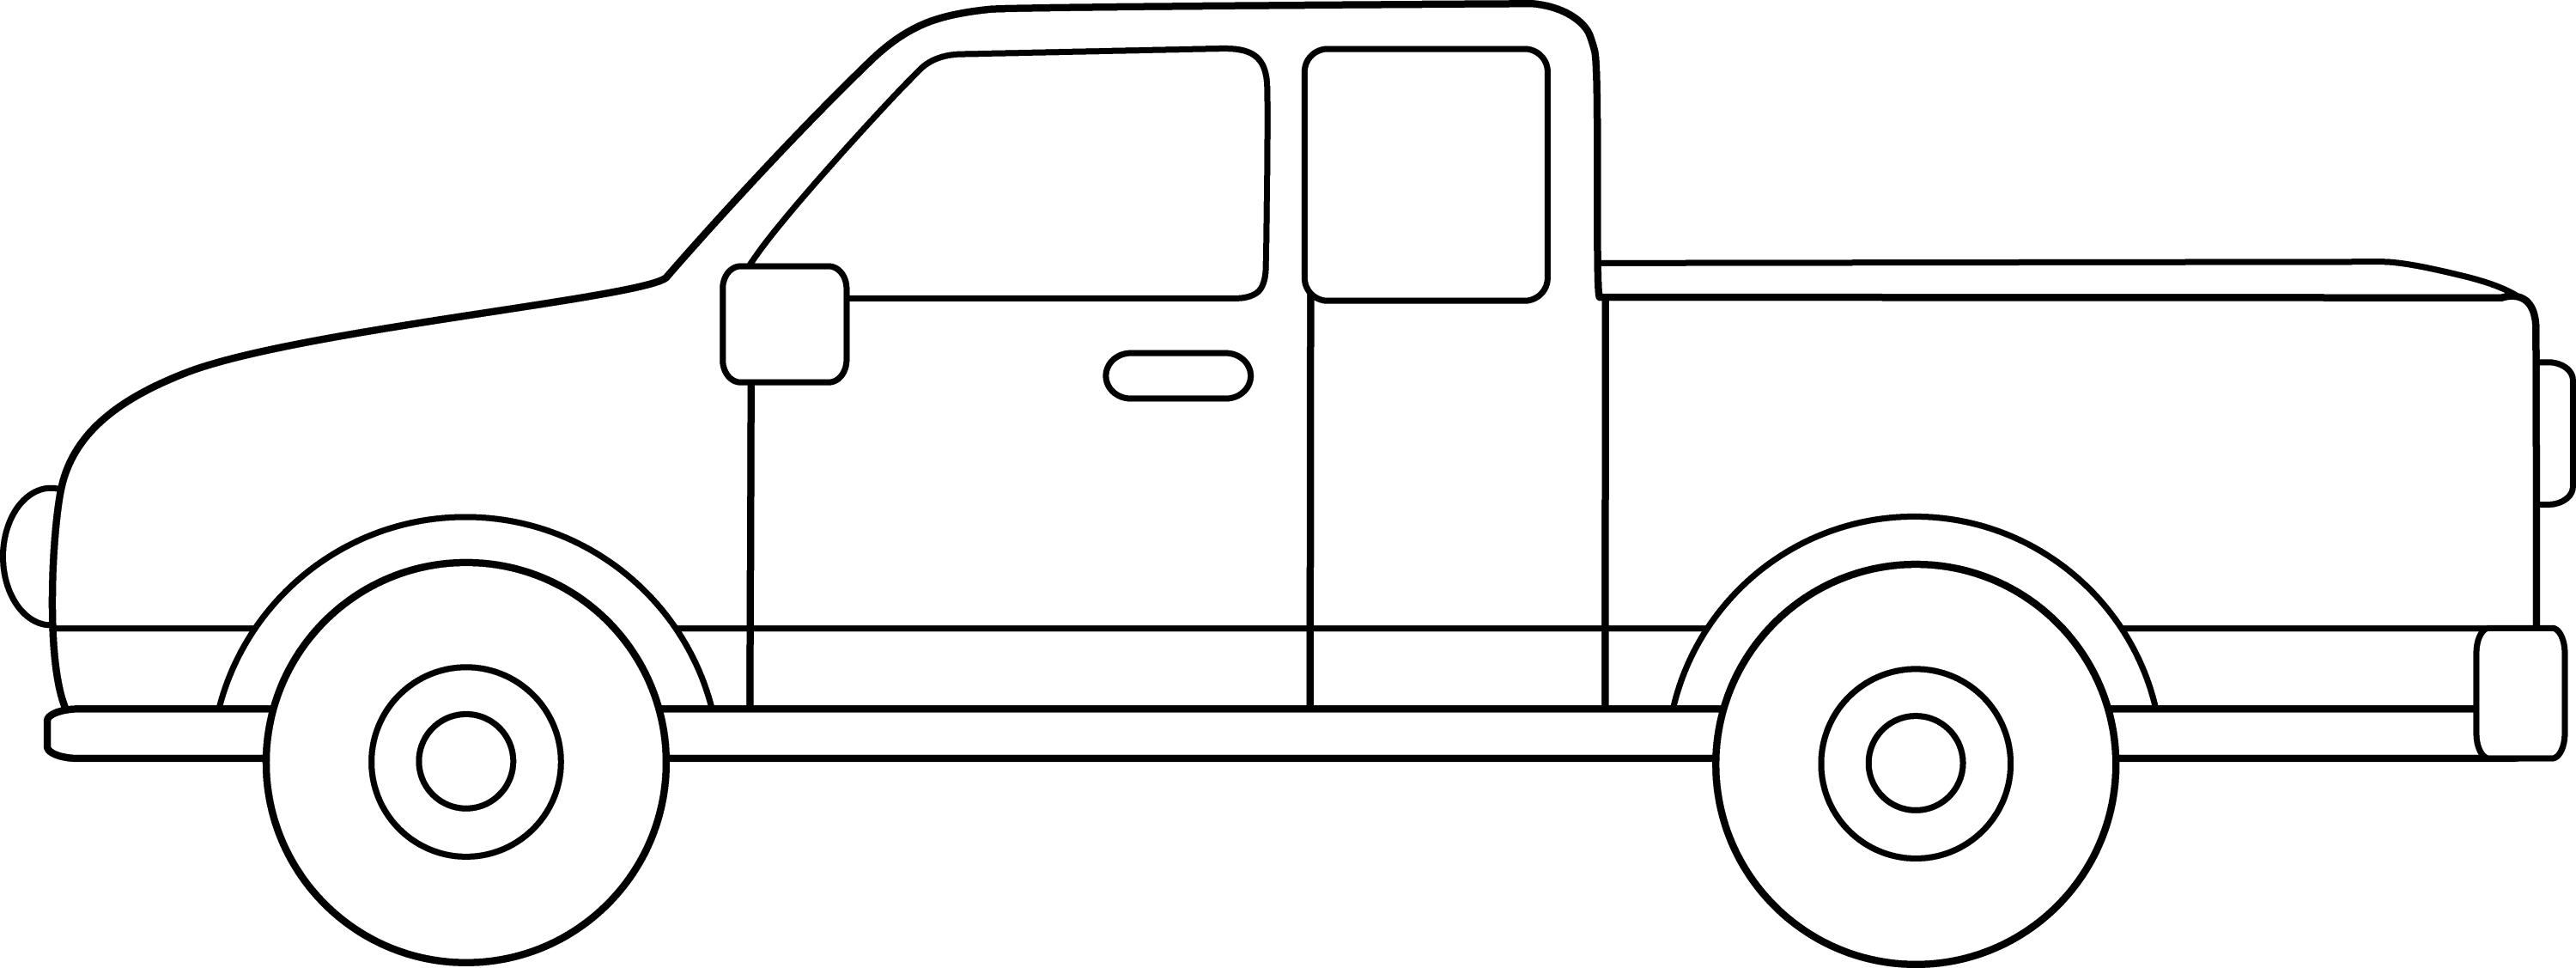 free black and white truck clipart - photo #20